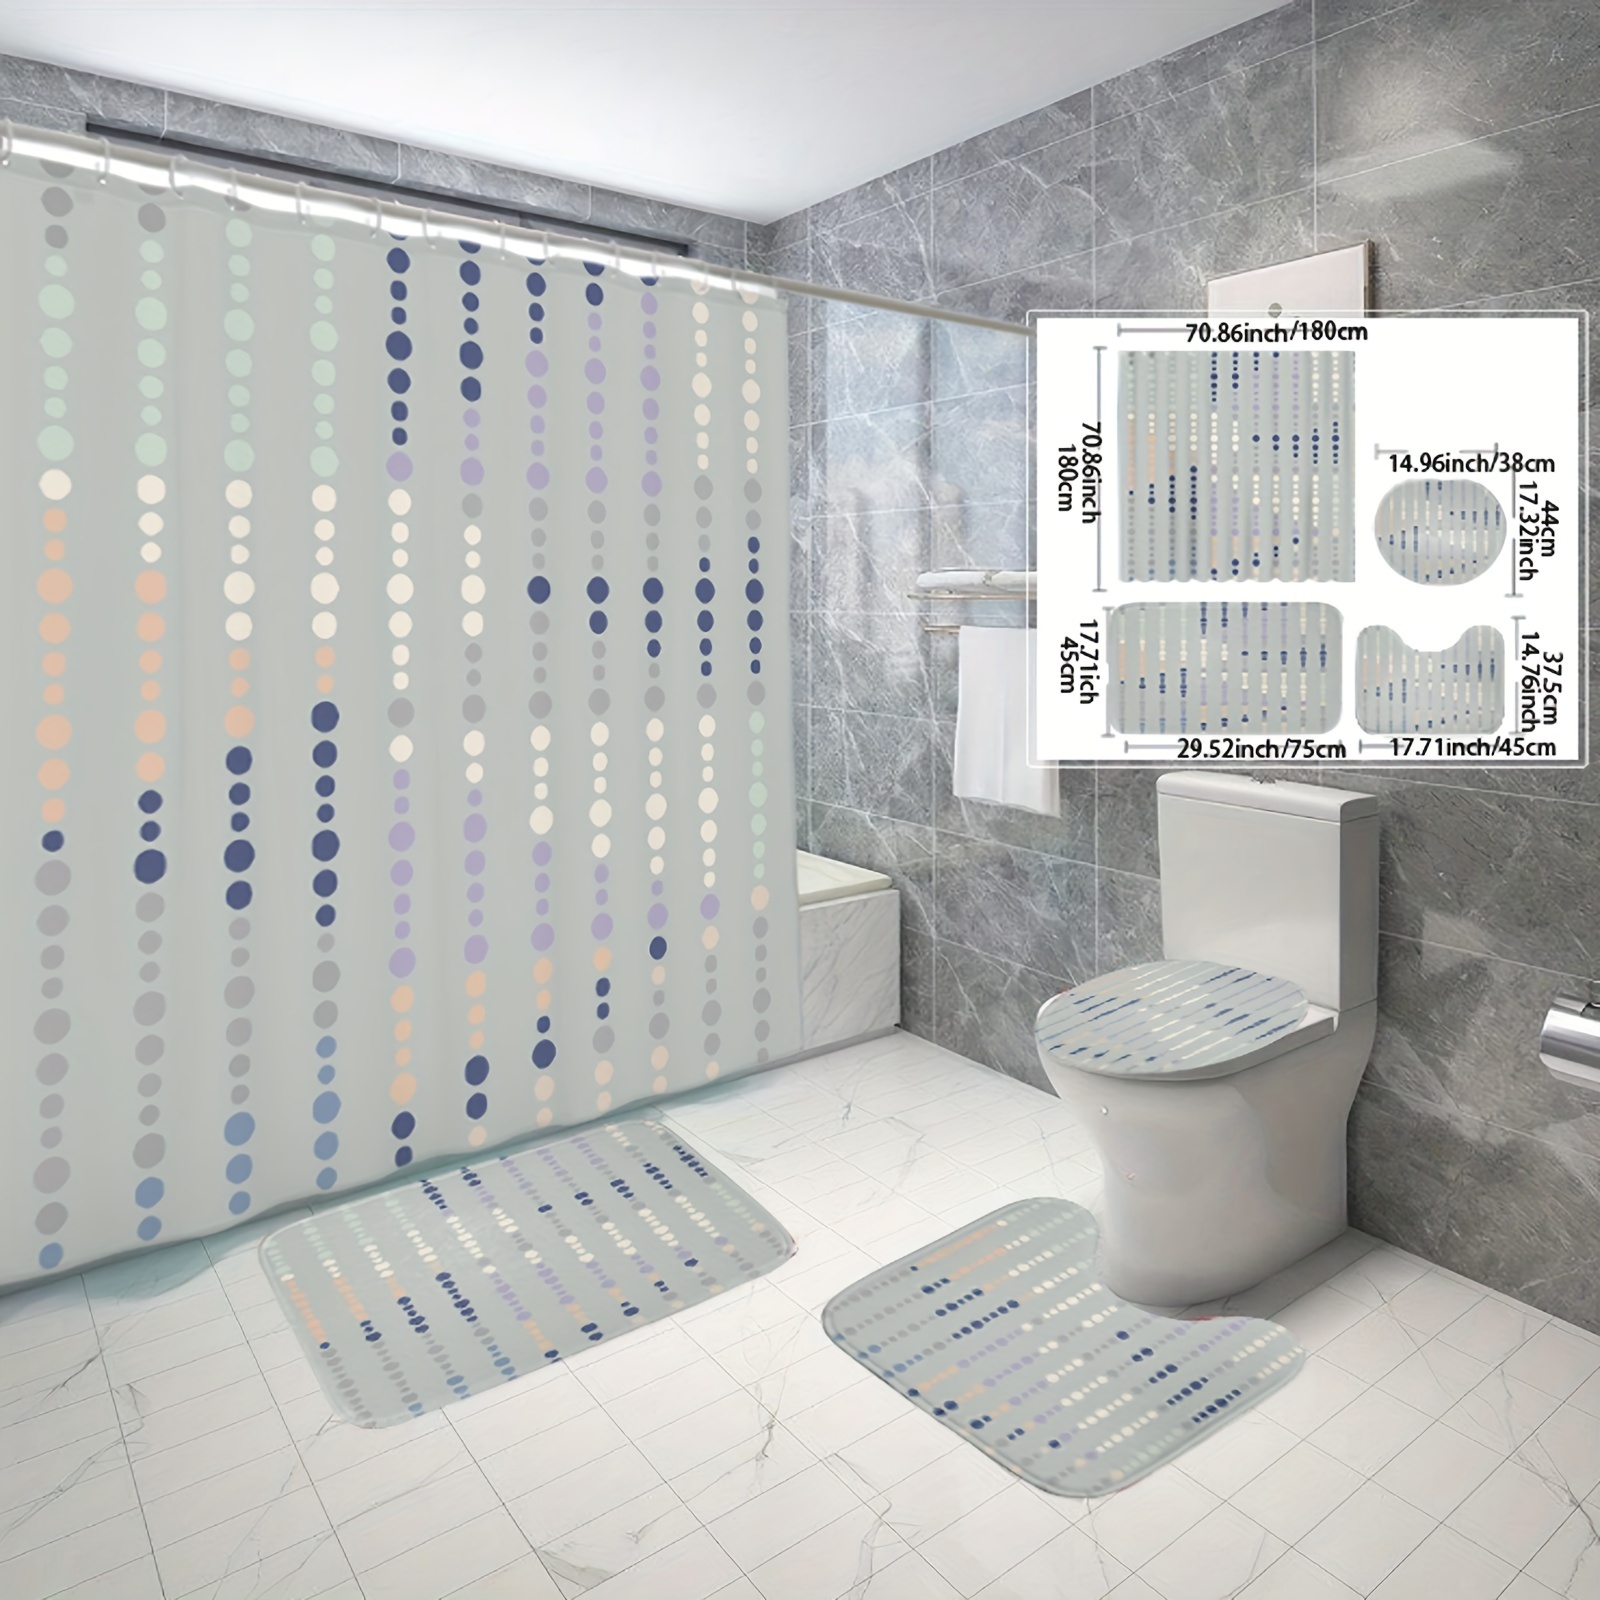 

Polka Dot Shower Curtain Set With Non-slip Bath Rugs And Toilet Lid Cover, Modern Digital Print Waterproof Bathroom Decor, Cordless And Woven Polyester, All-season Artistic Design With Lining Included